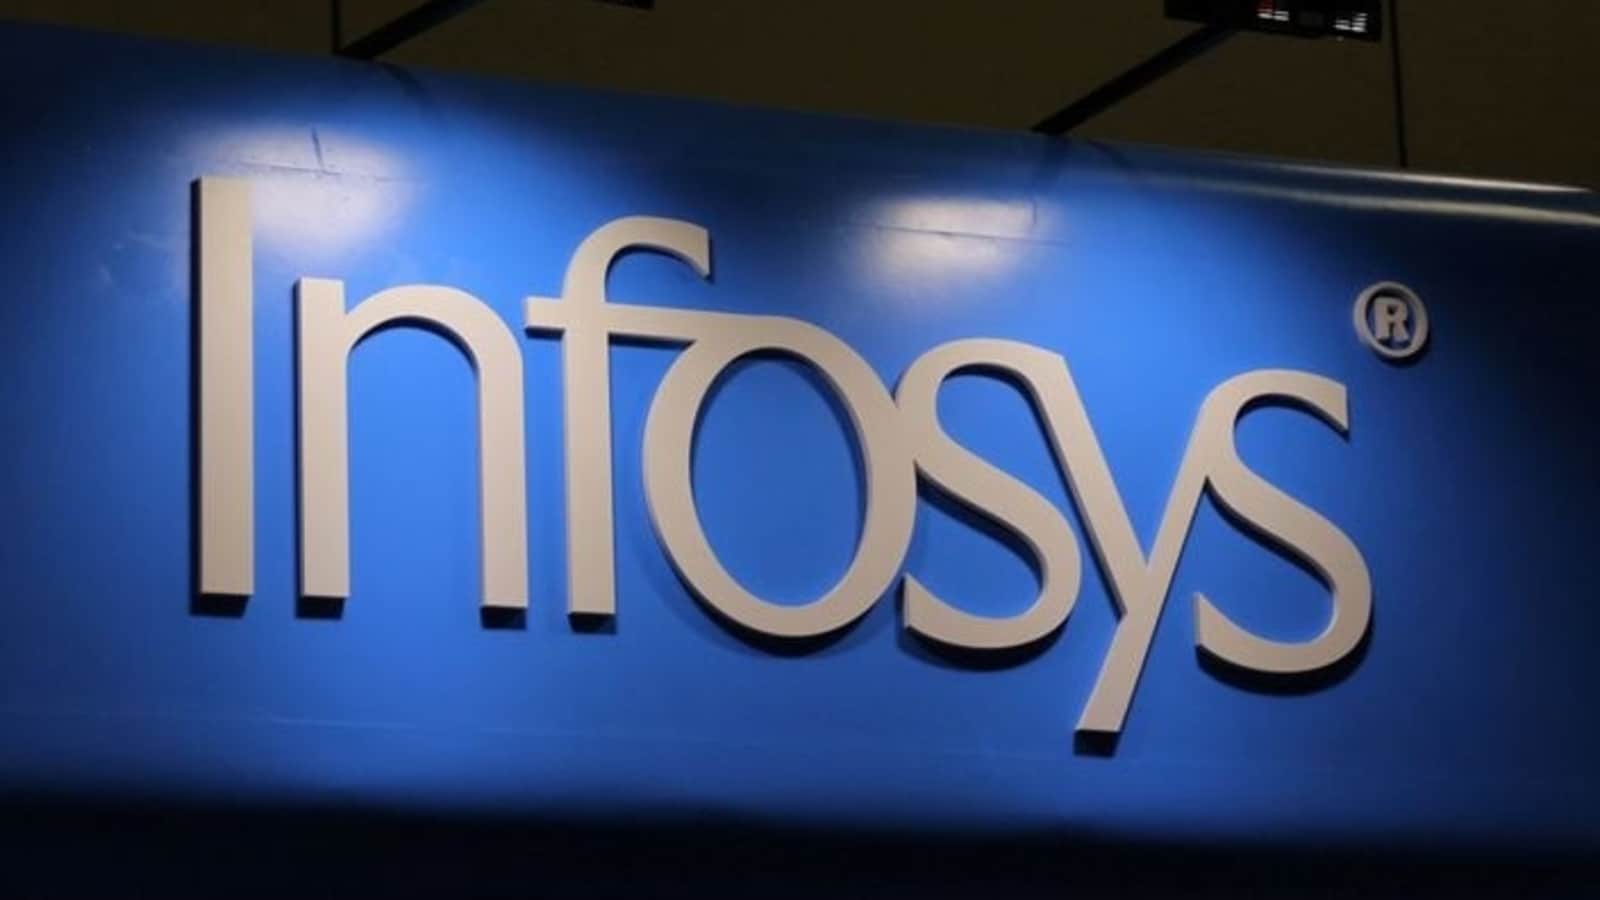 Infosys employees can work ‘gig jobs’ outside company. Conditions apply